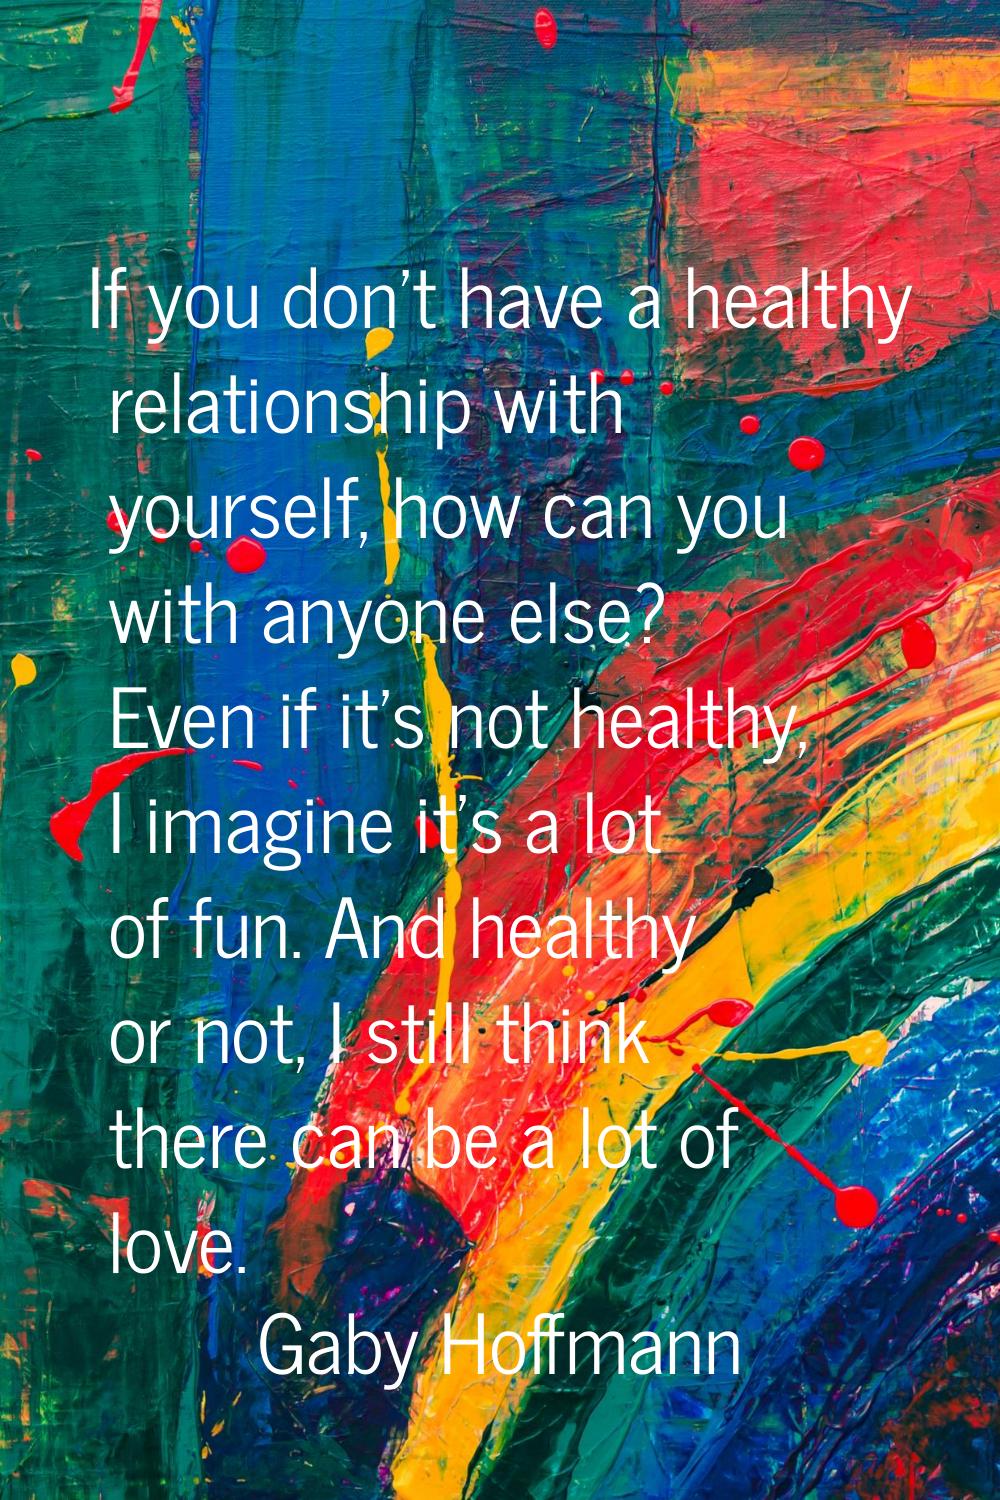 If you don't have a healthy relationship with yourself, how can you with anyone else? Even if it's 